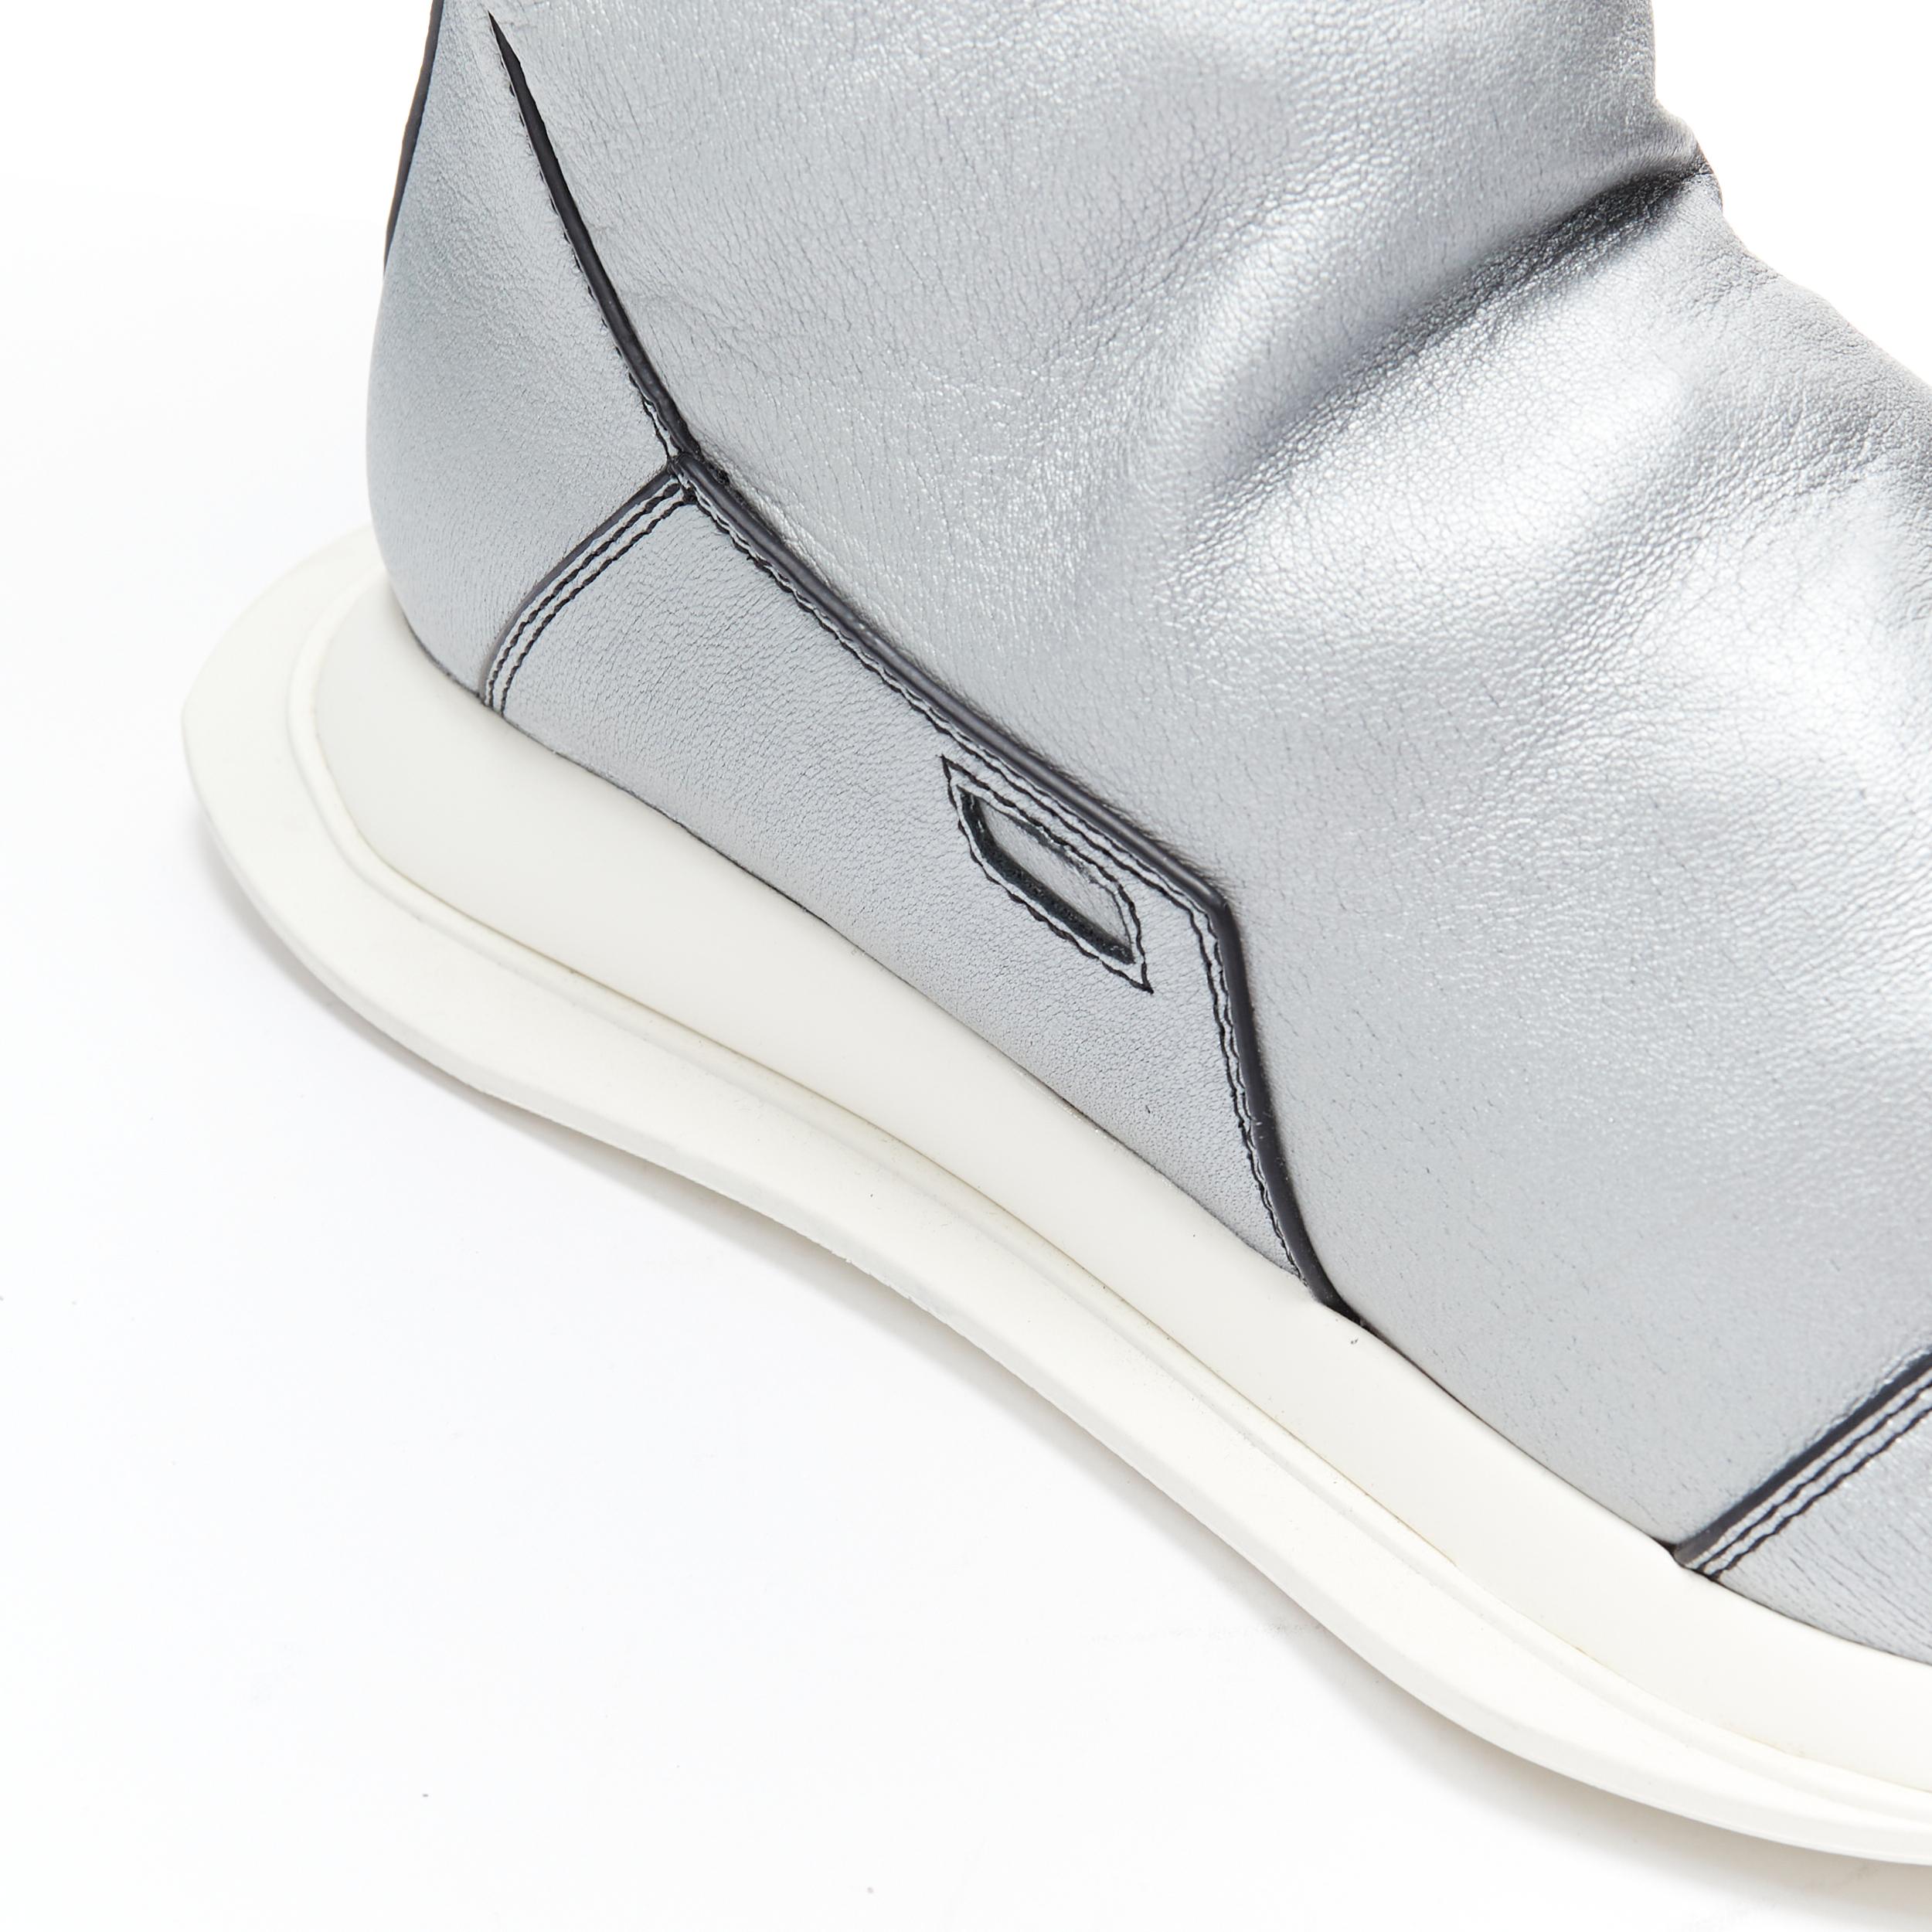 new RICK OWENS Runway New Runner Stretch silver black stocking boot sneaker EU36 For Sale 1